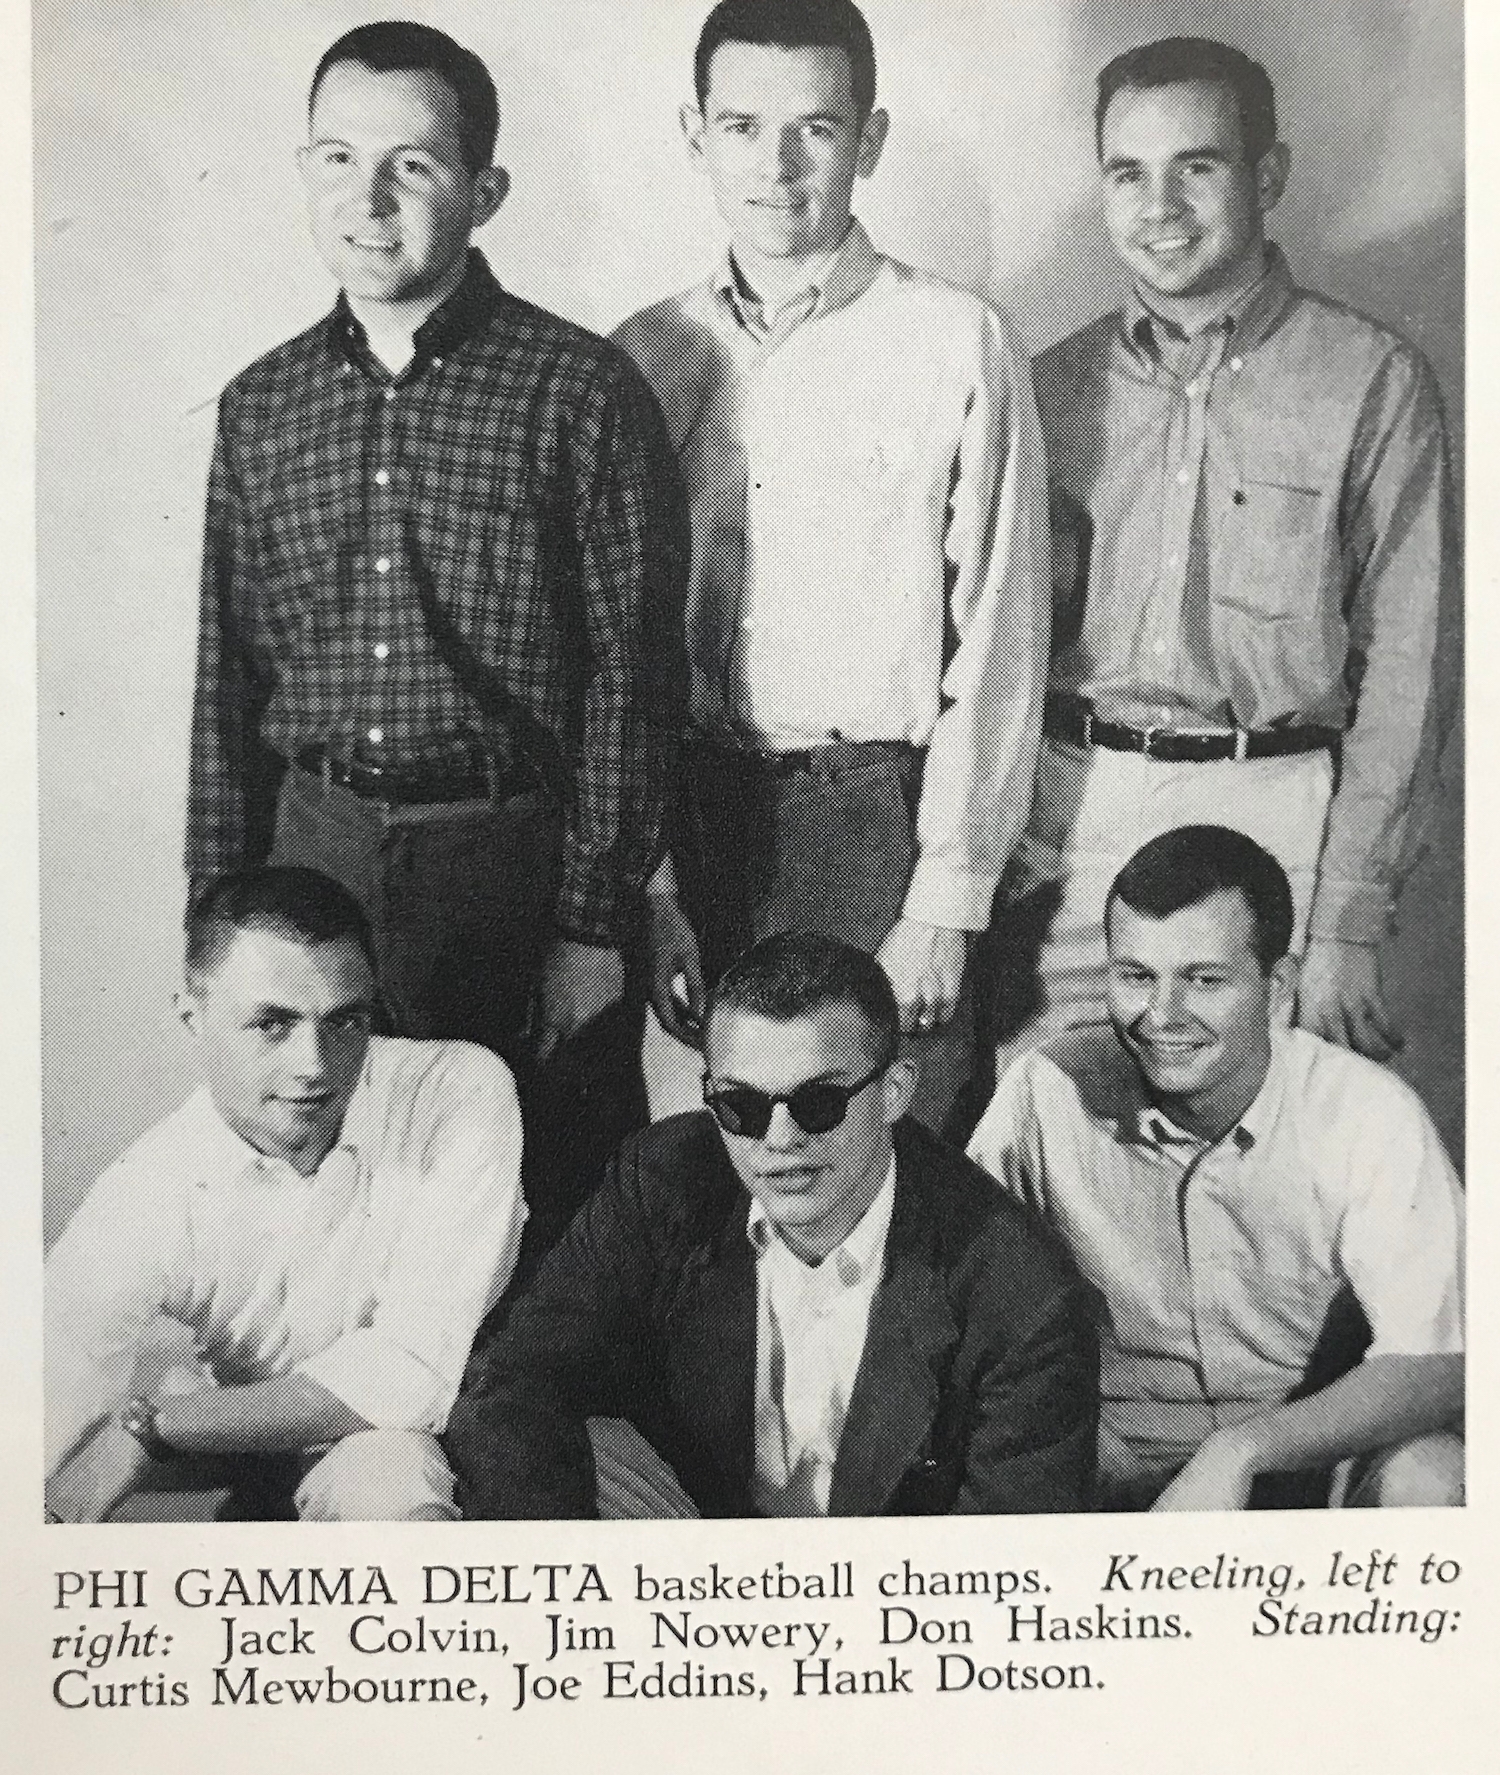 Curtis Mewbourne (standing on the left) posing with his fraternity’s championship basketball team.